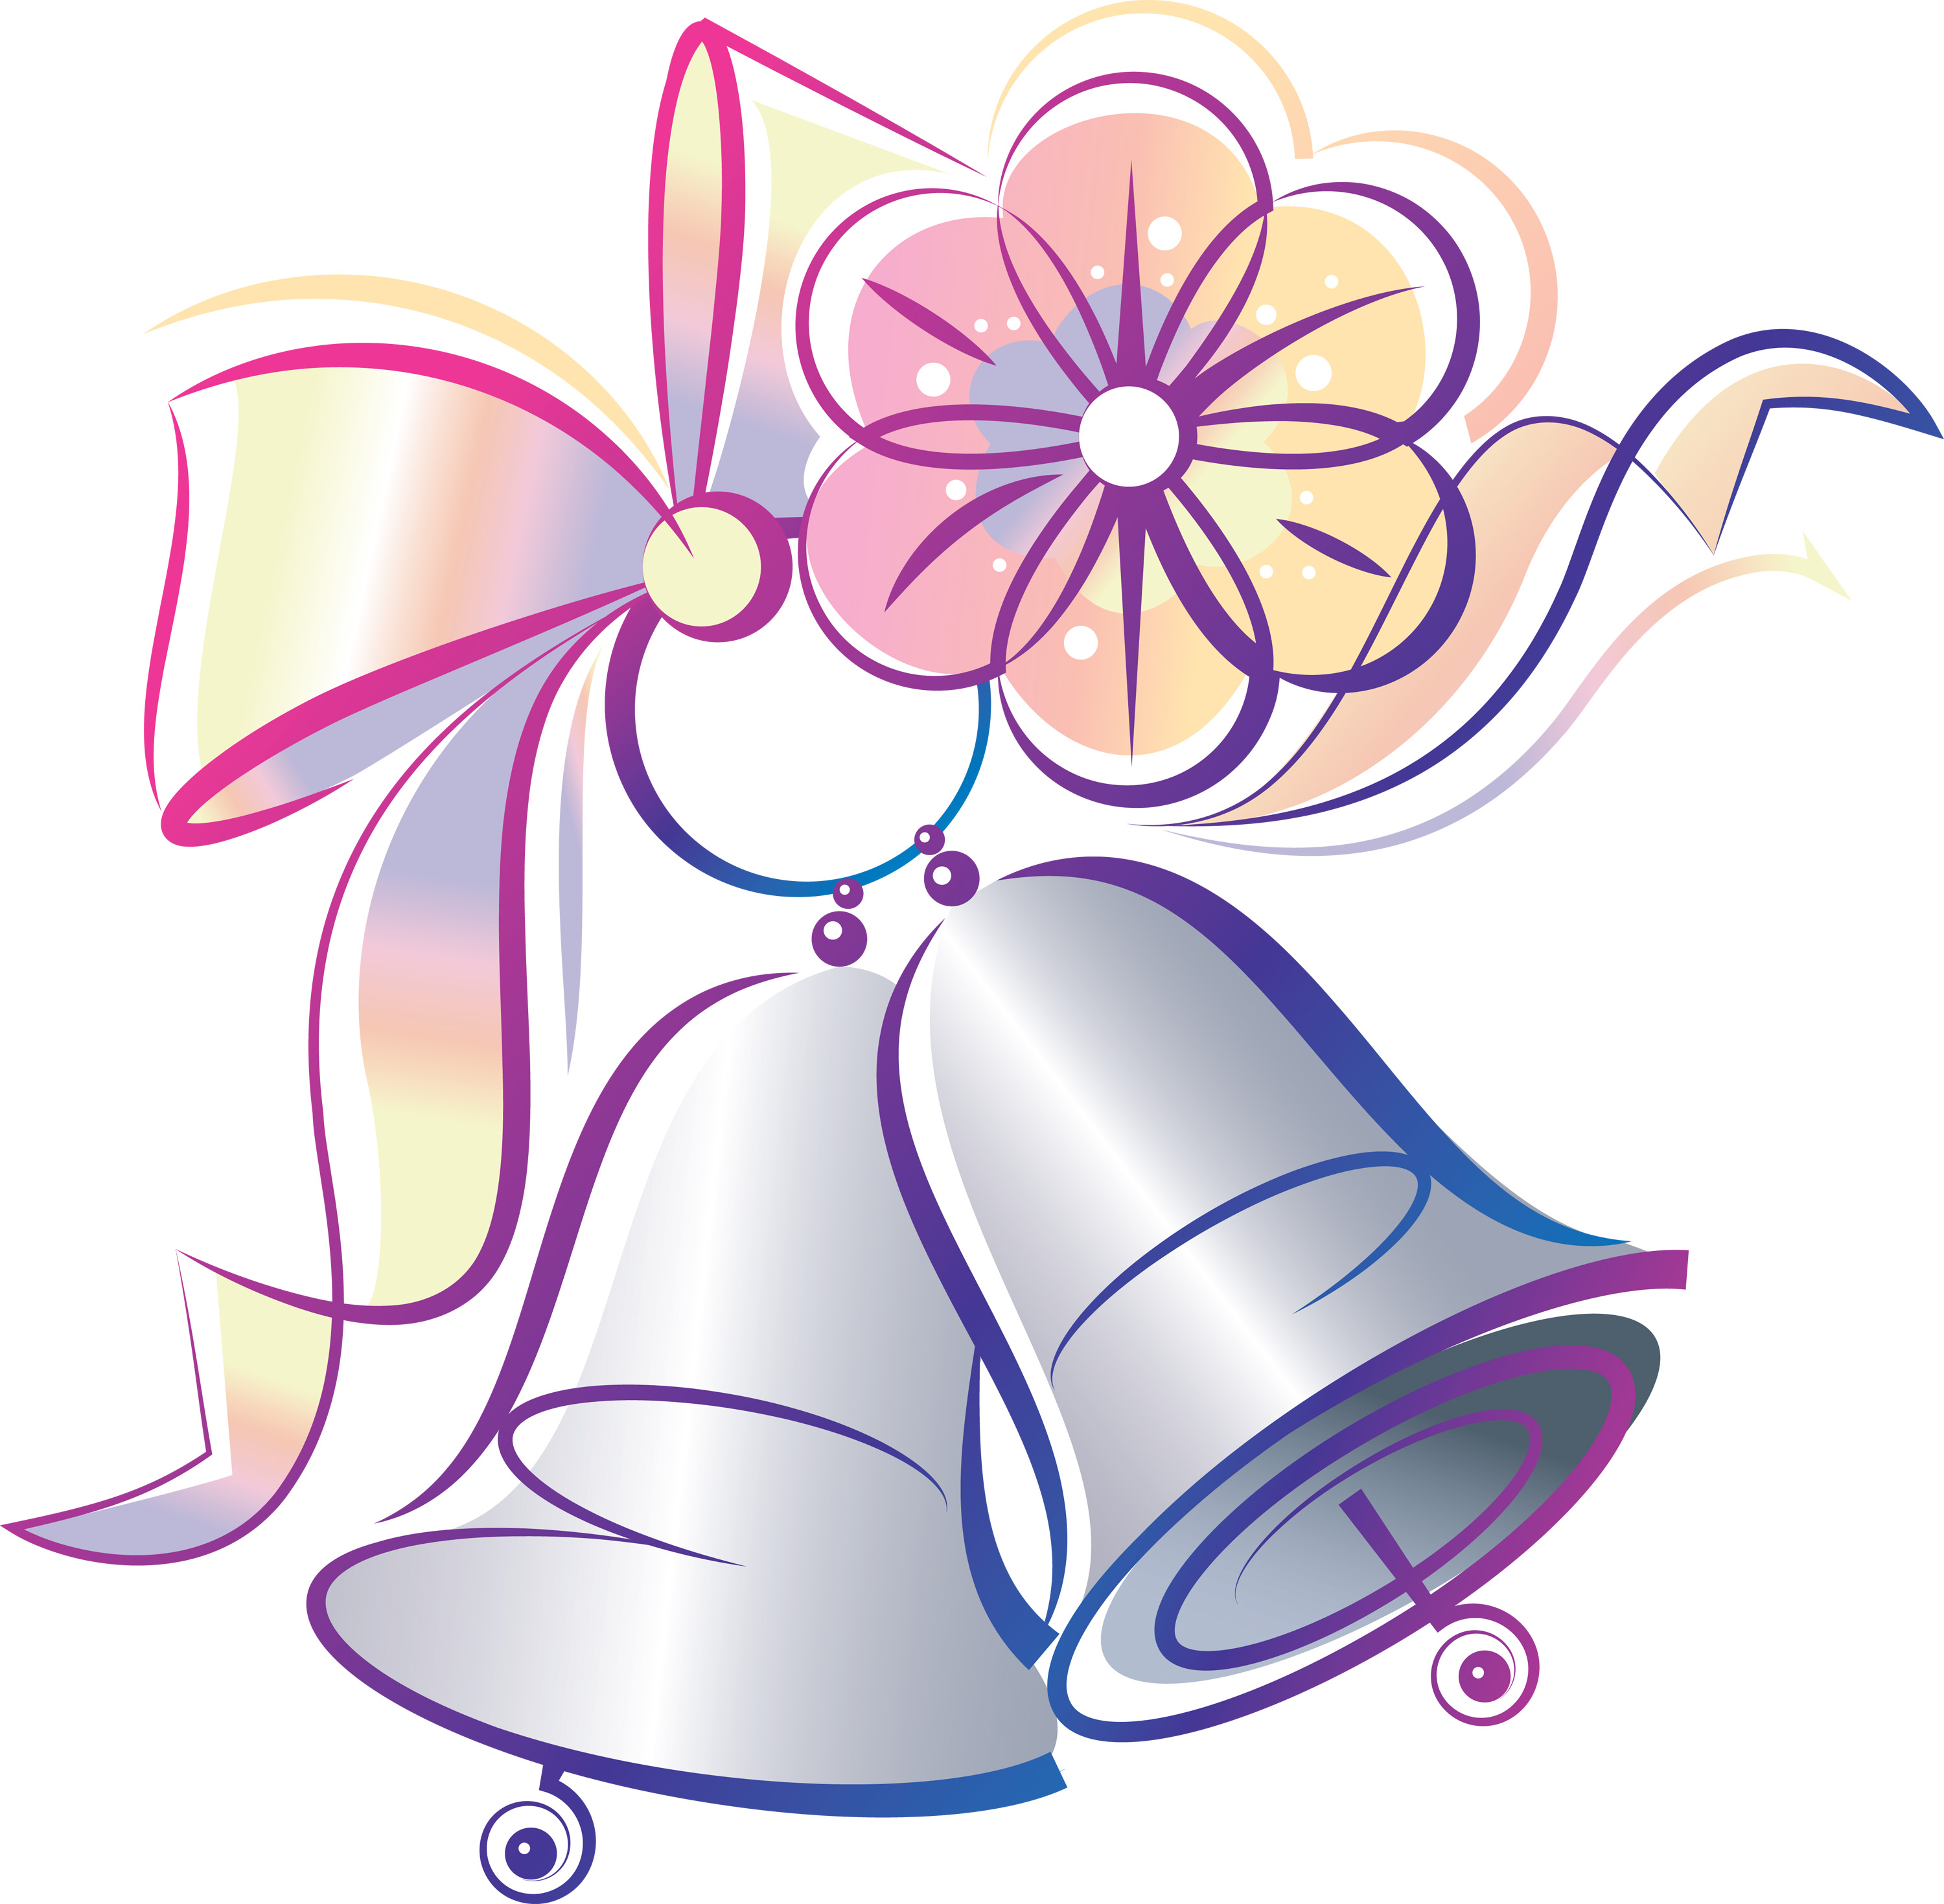 Download Wedding Bell Drawing at GetDrawings.com | Free for personal use Wedding Bell Drawing of your choice